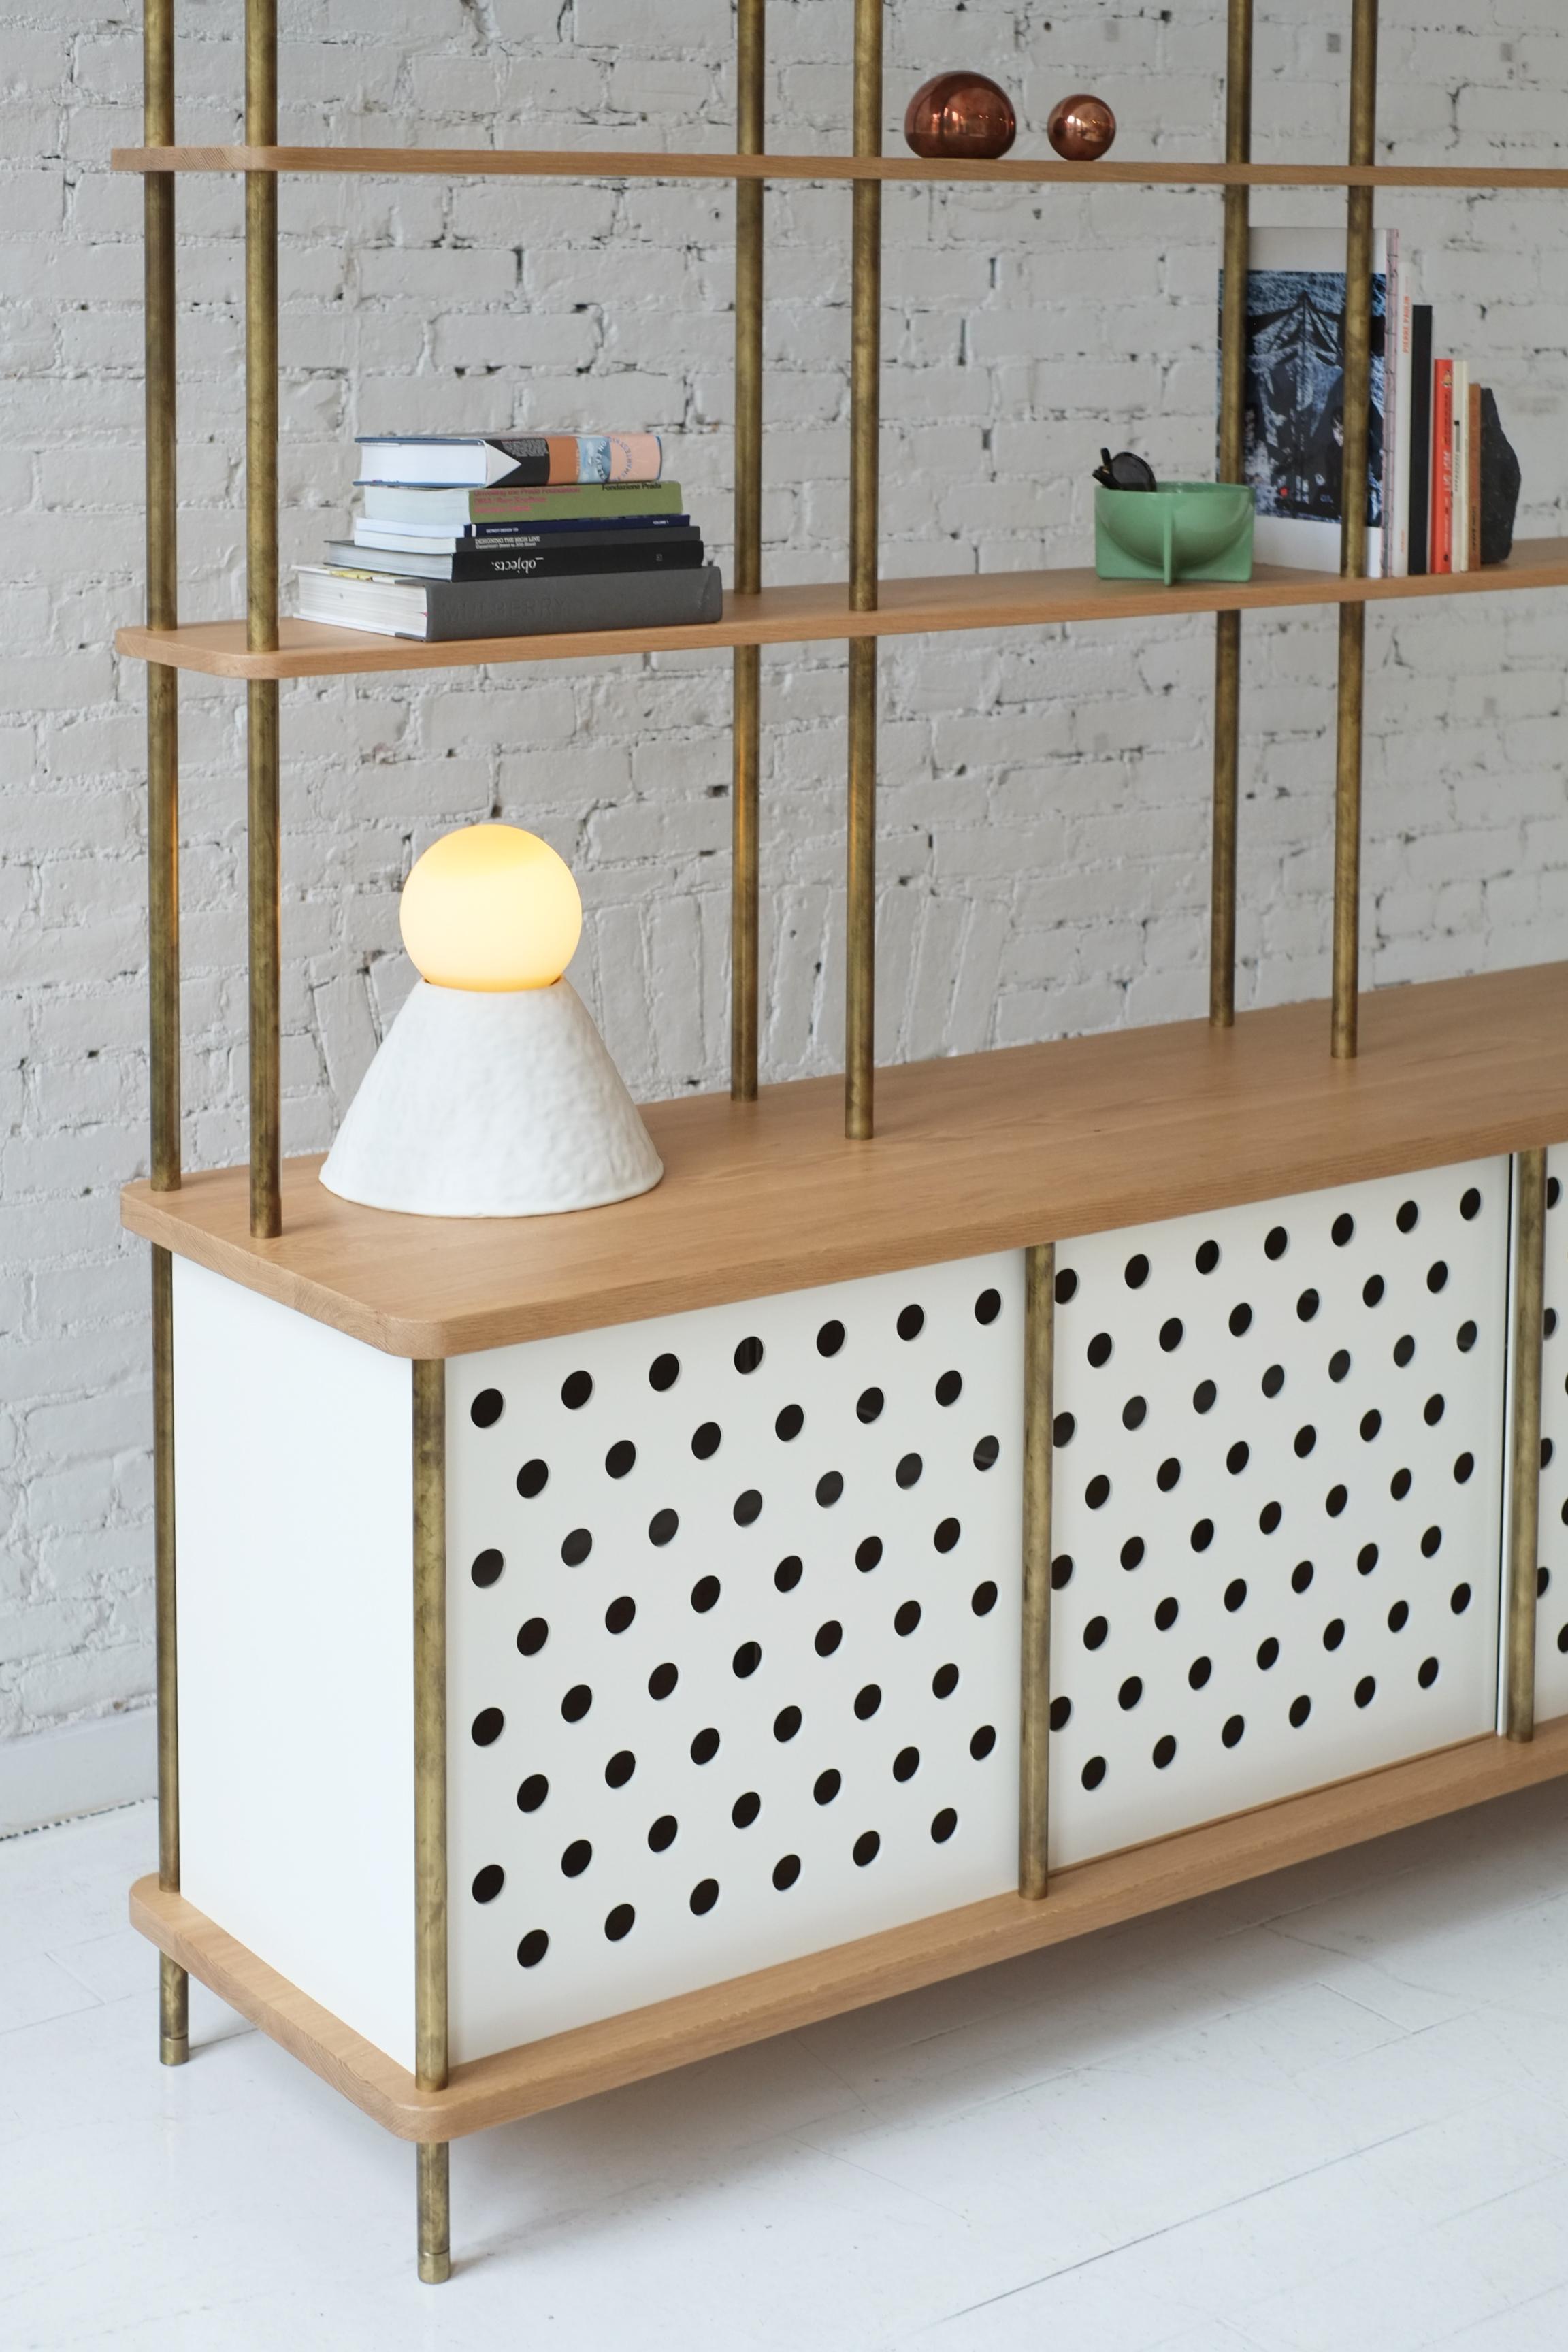 Consistent with the Strata collection, the new Strata sideboard is designed to be modular in order to create versatile configurations tailored to your needs. Shown with brass rods, walnut shelving and powder coated aluminum sliding doors, all